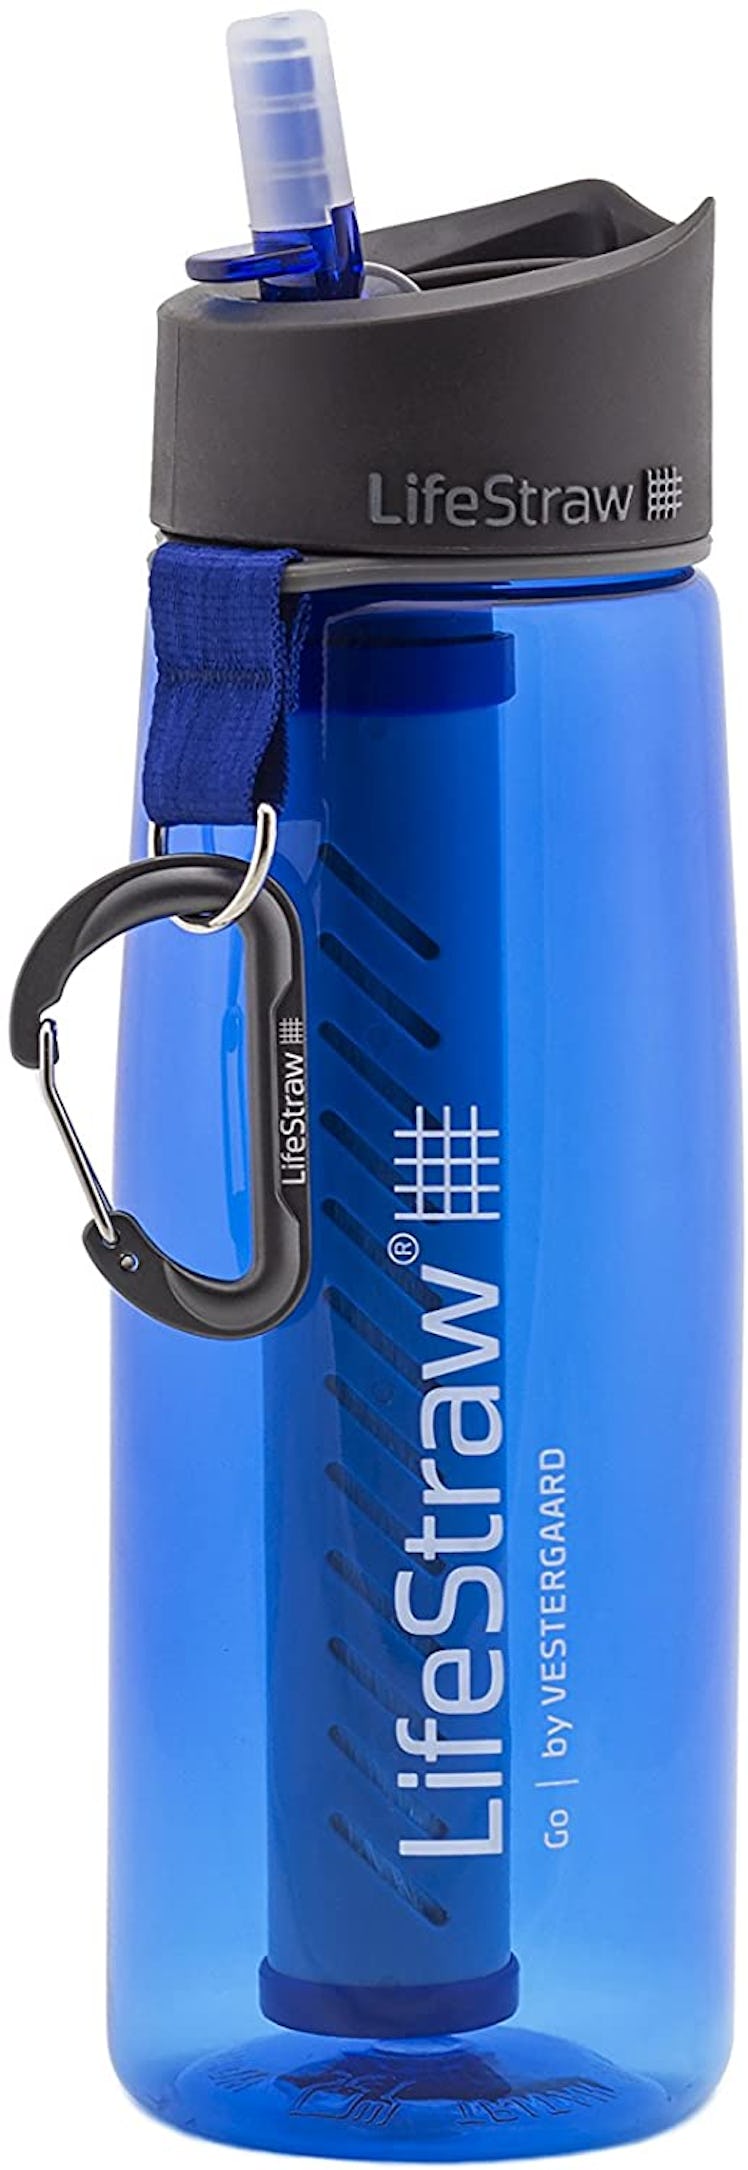 A water bottle is one of the solo travel essentials recommended by travel influencers. 